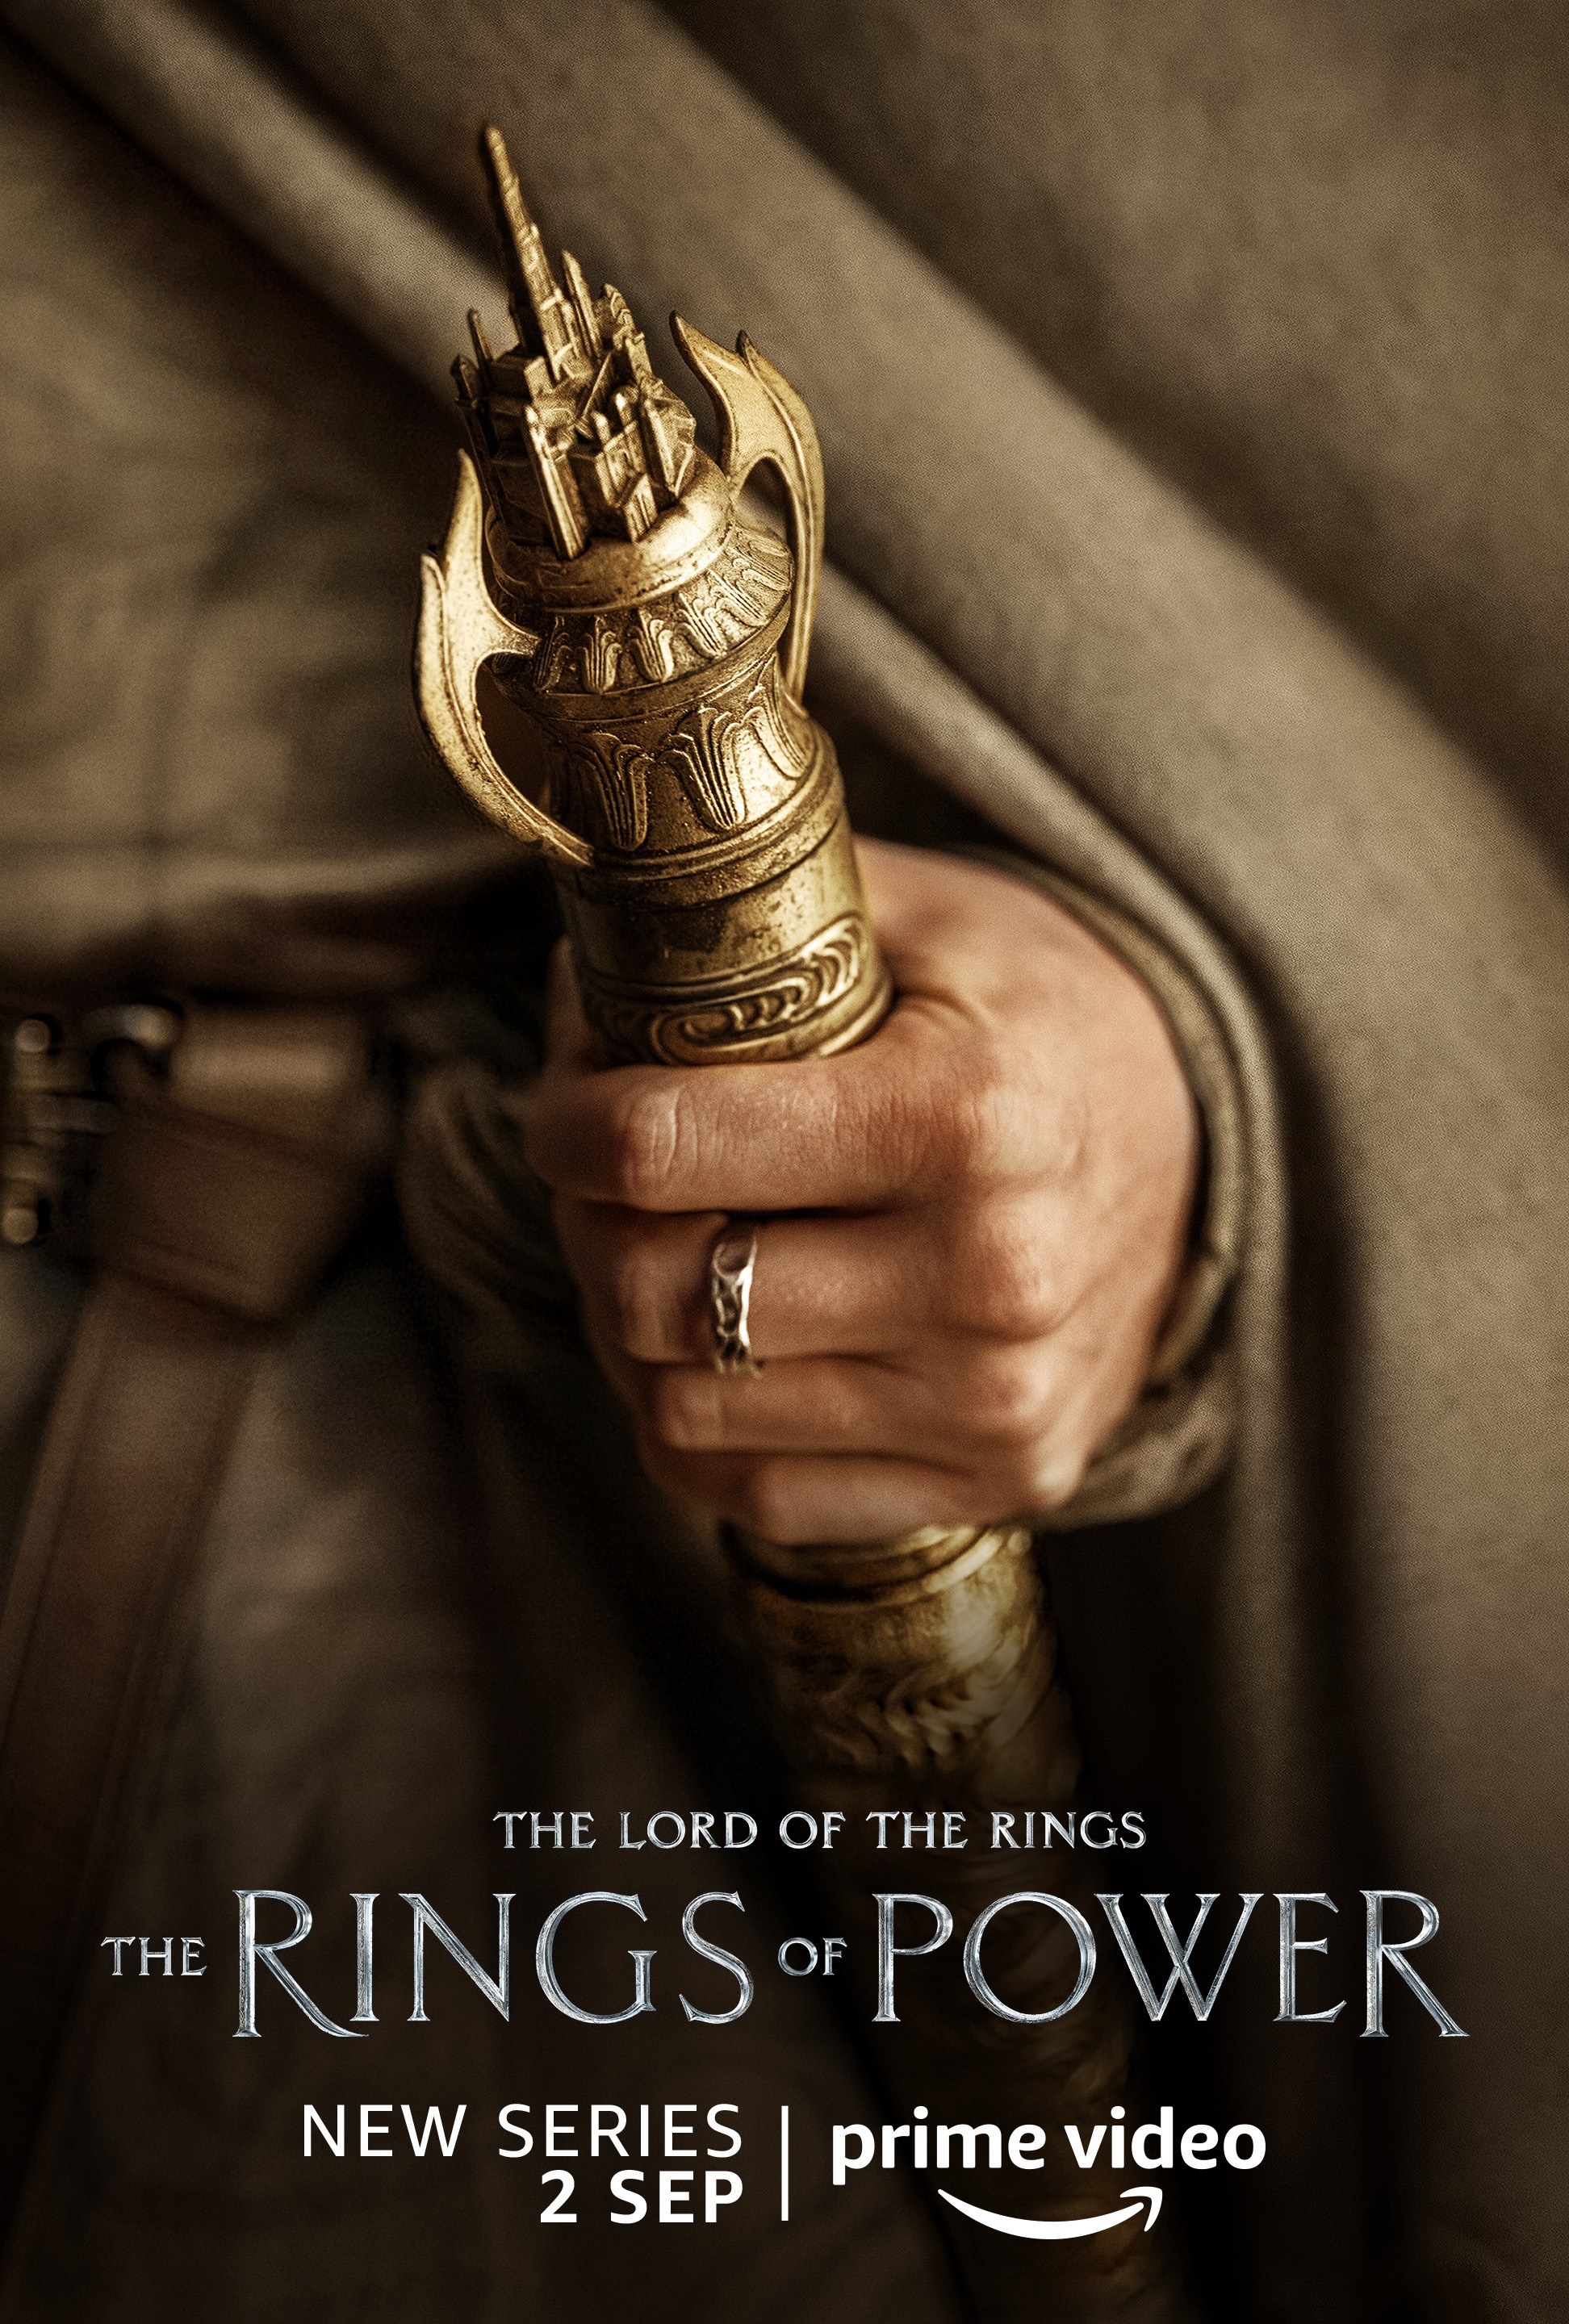 A human knight character poster for Lord of the Rings: The Rings of Power